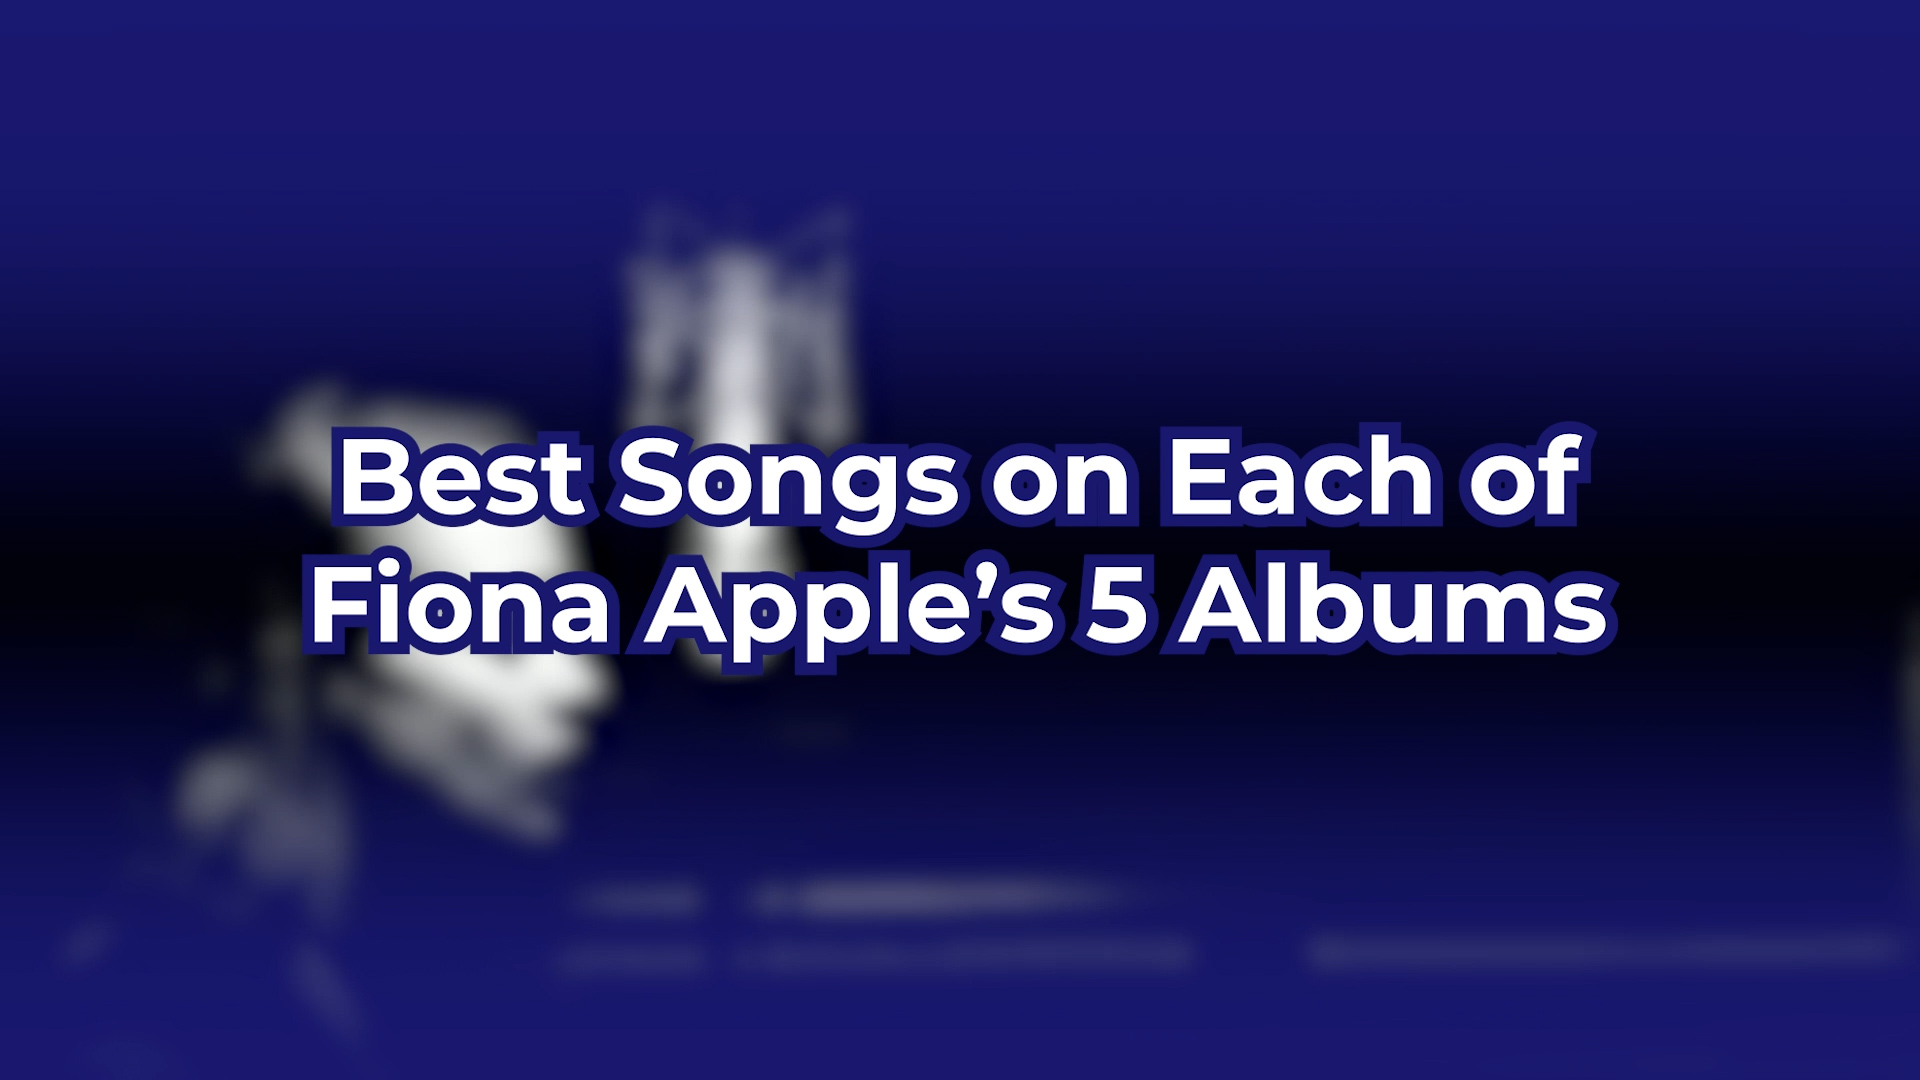 Best Songs on Each of Fiona Apple's Albums